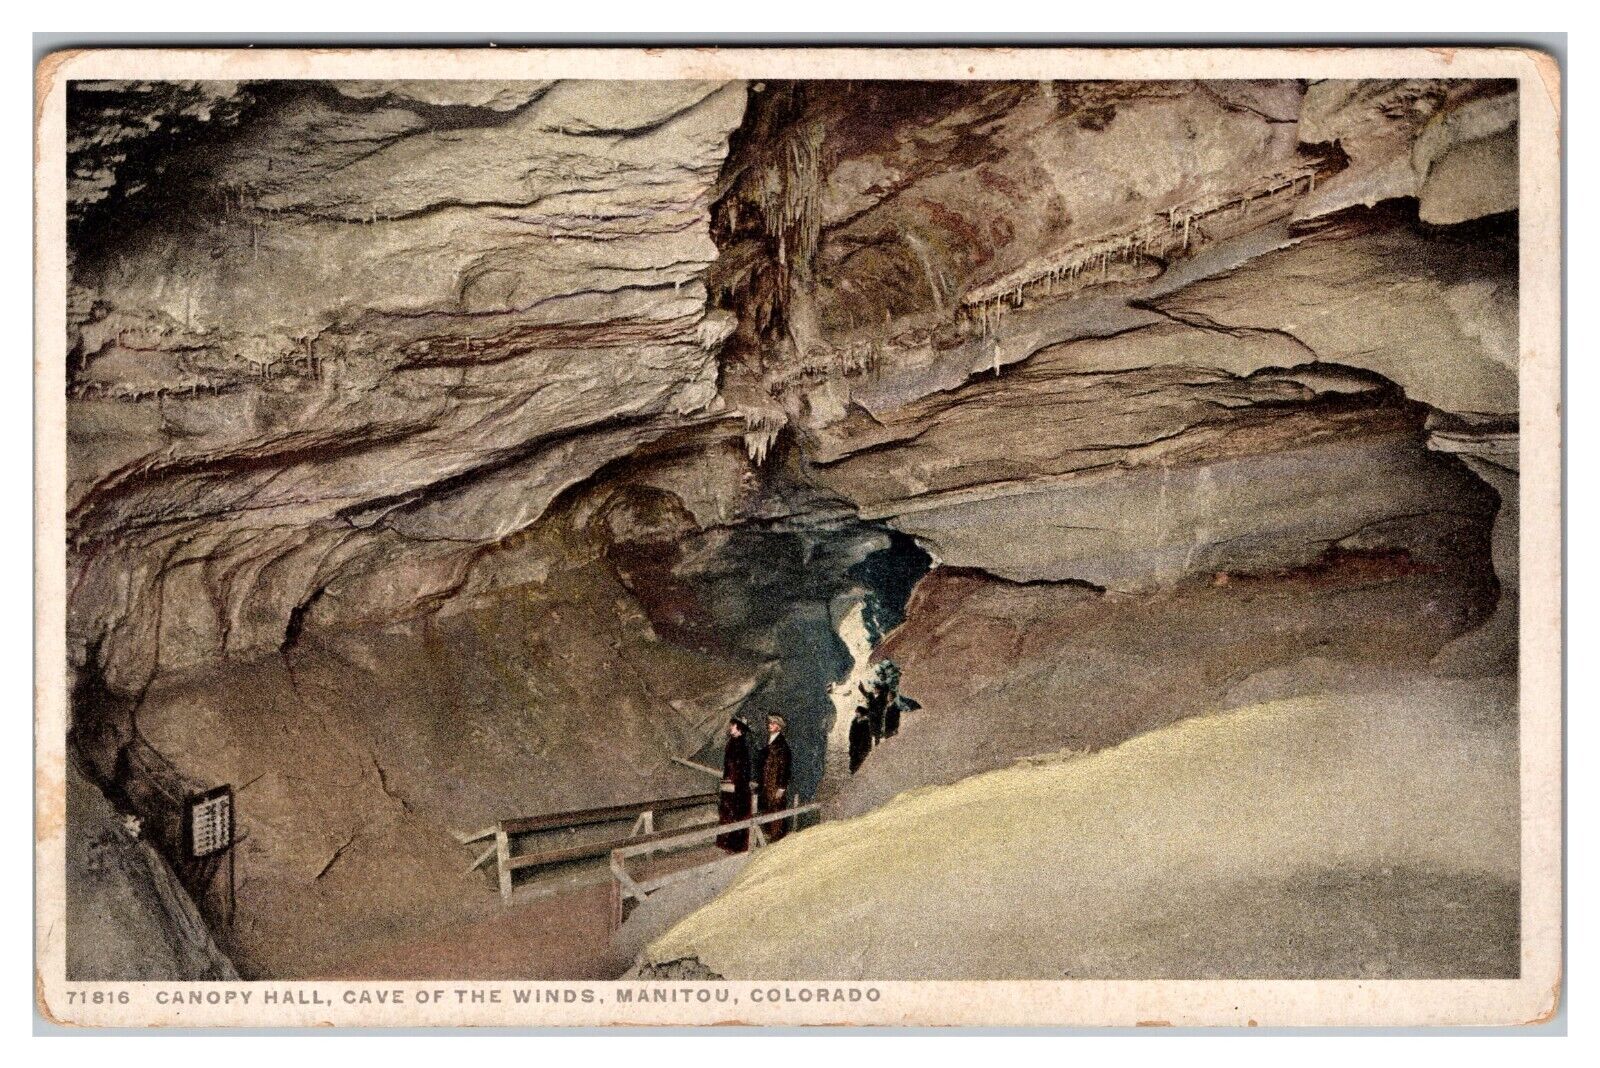 Canopy Hall, Cave Of The Winds, Manitou, Colorado Postcard